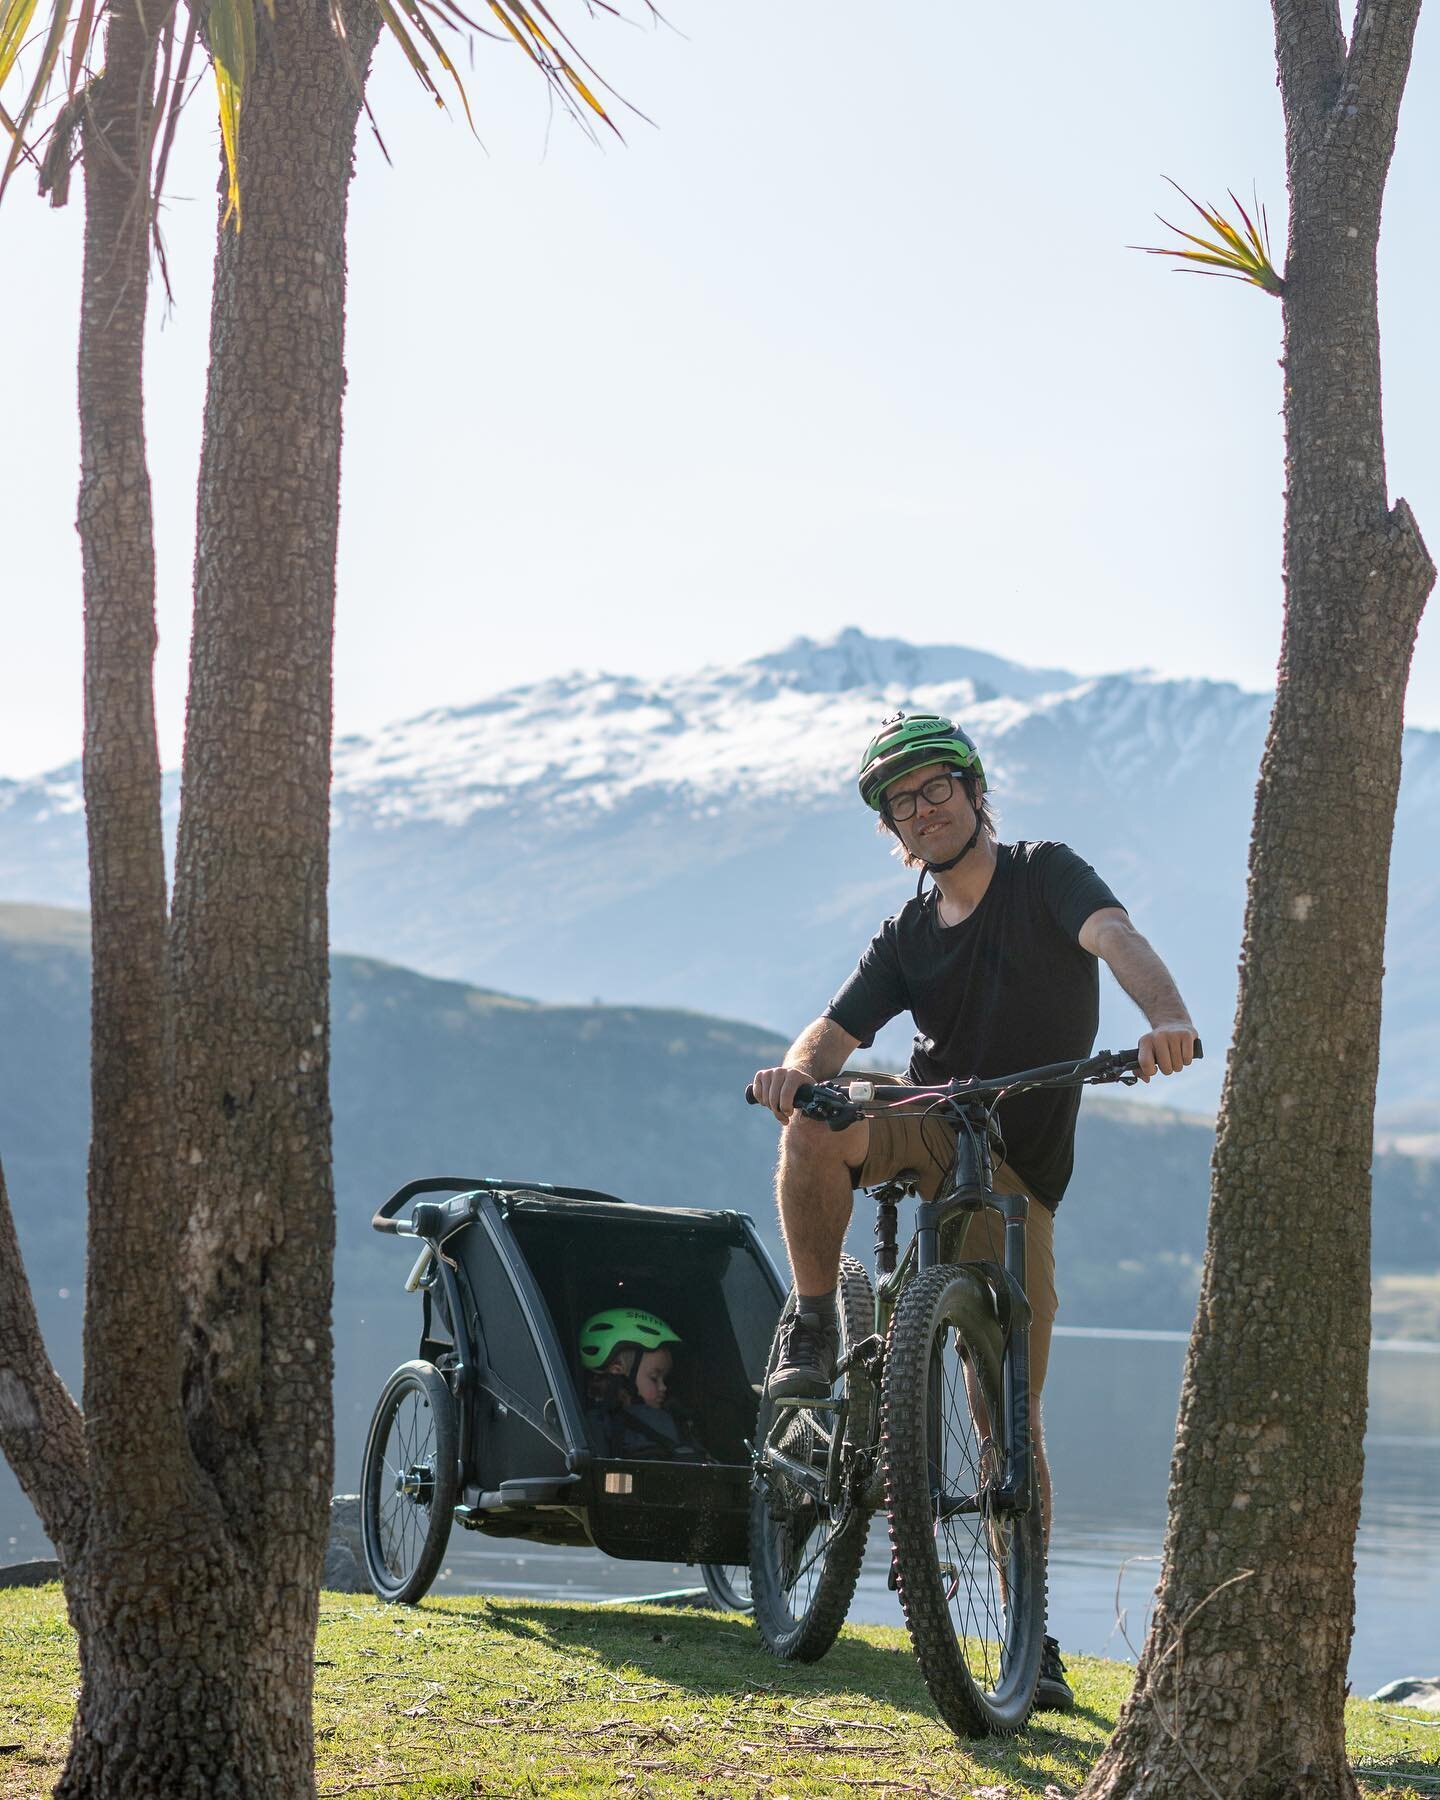 @thule Chariot Sport 2&hellip; with room for the next little shredder on the way&hellip; it&rsquo;s an epic adventure trailer which is also a pram, snow sled, jogger stroller and folds flat. Adventure season is upon us!

@torpedo7 @icebreakernz @thul